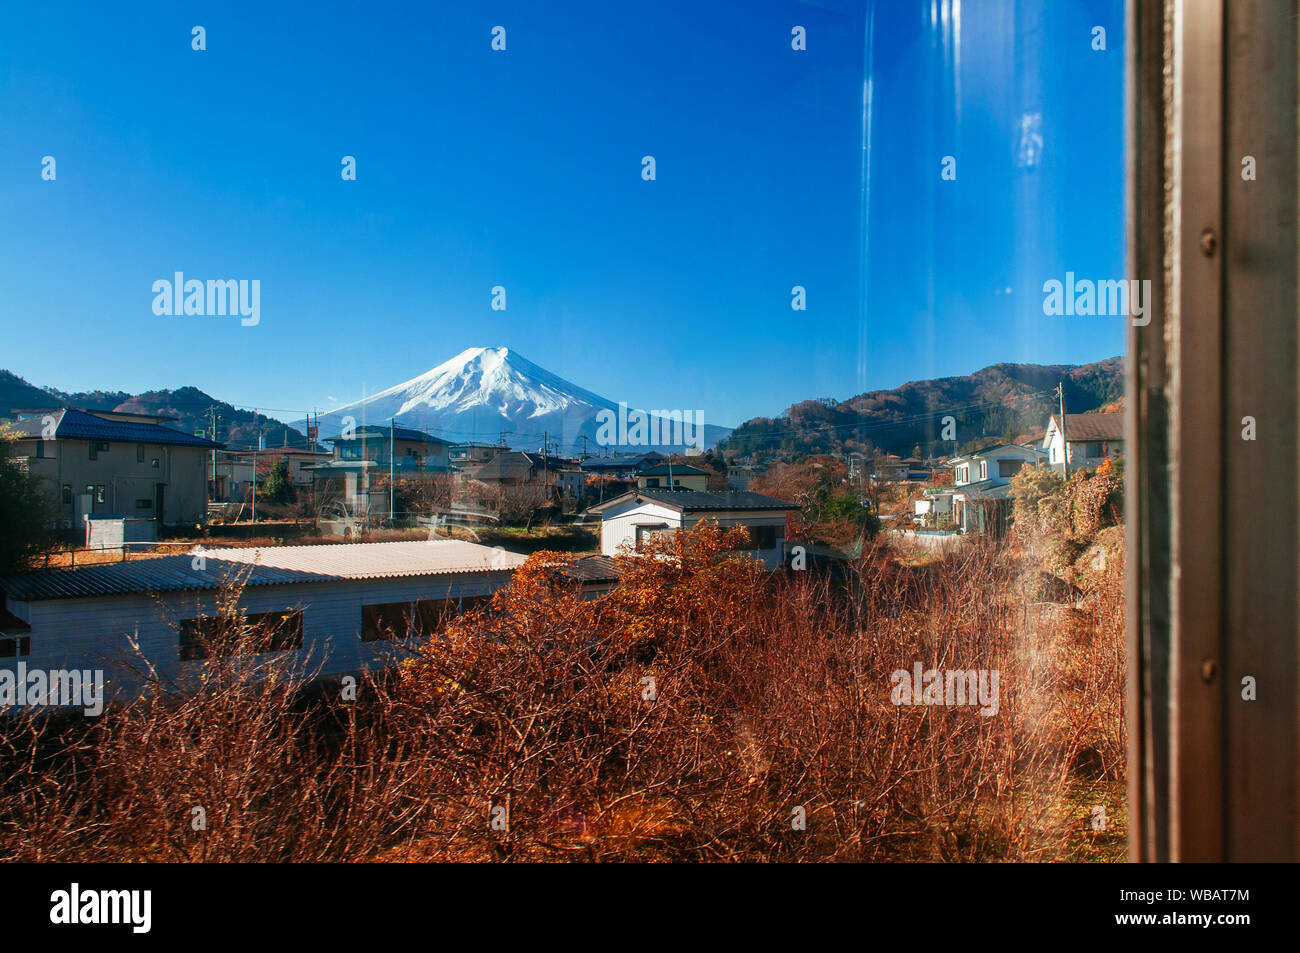 Snow covered Mount Fuji and local town along train route from Tokyo to Kawaguchiko seen through train window with some mirror reflect on right side Stock Photo